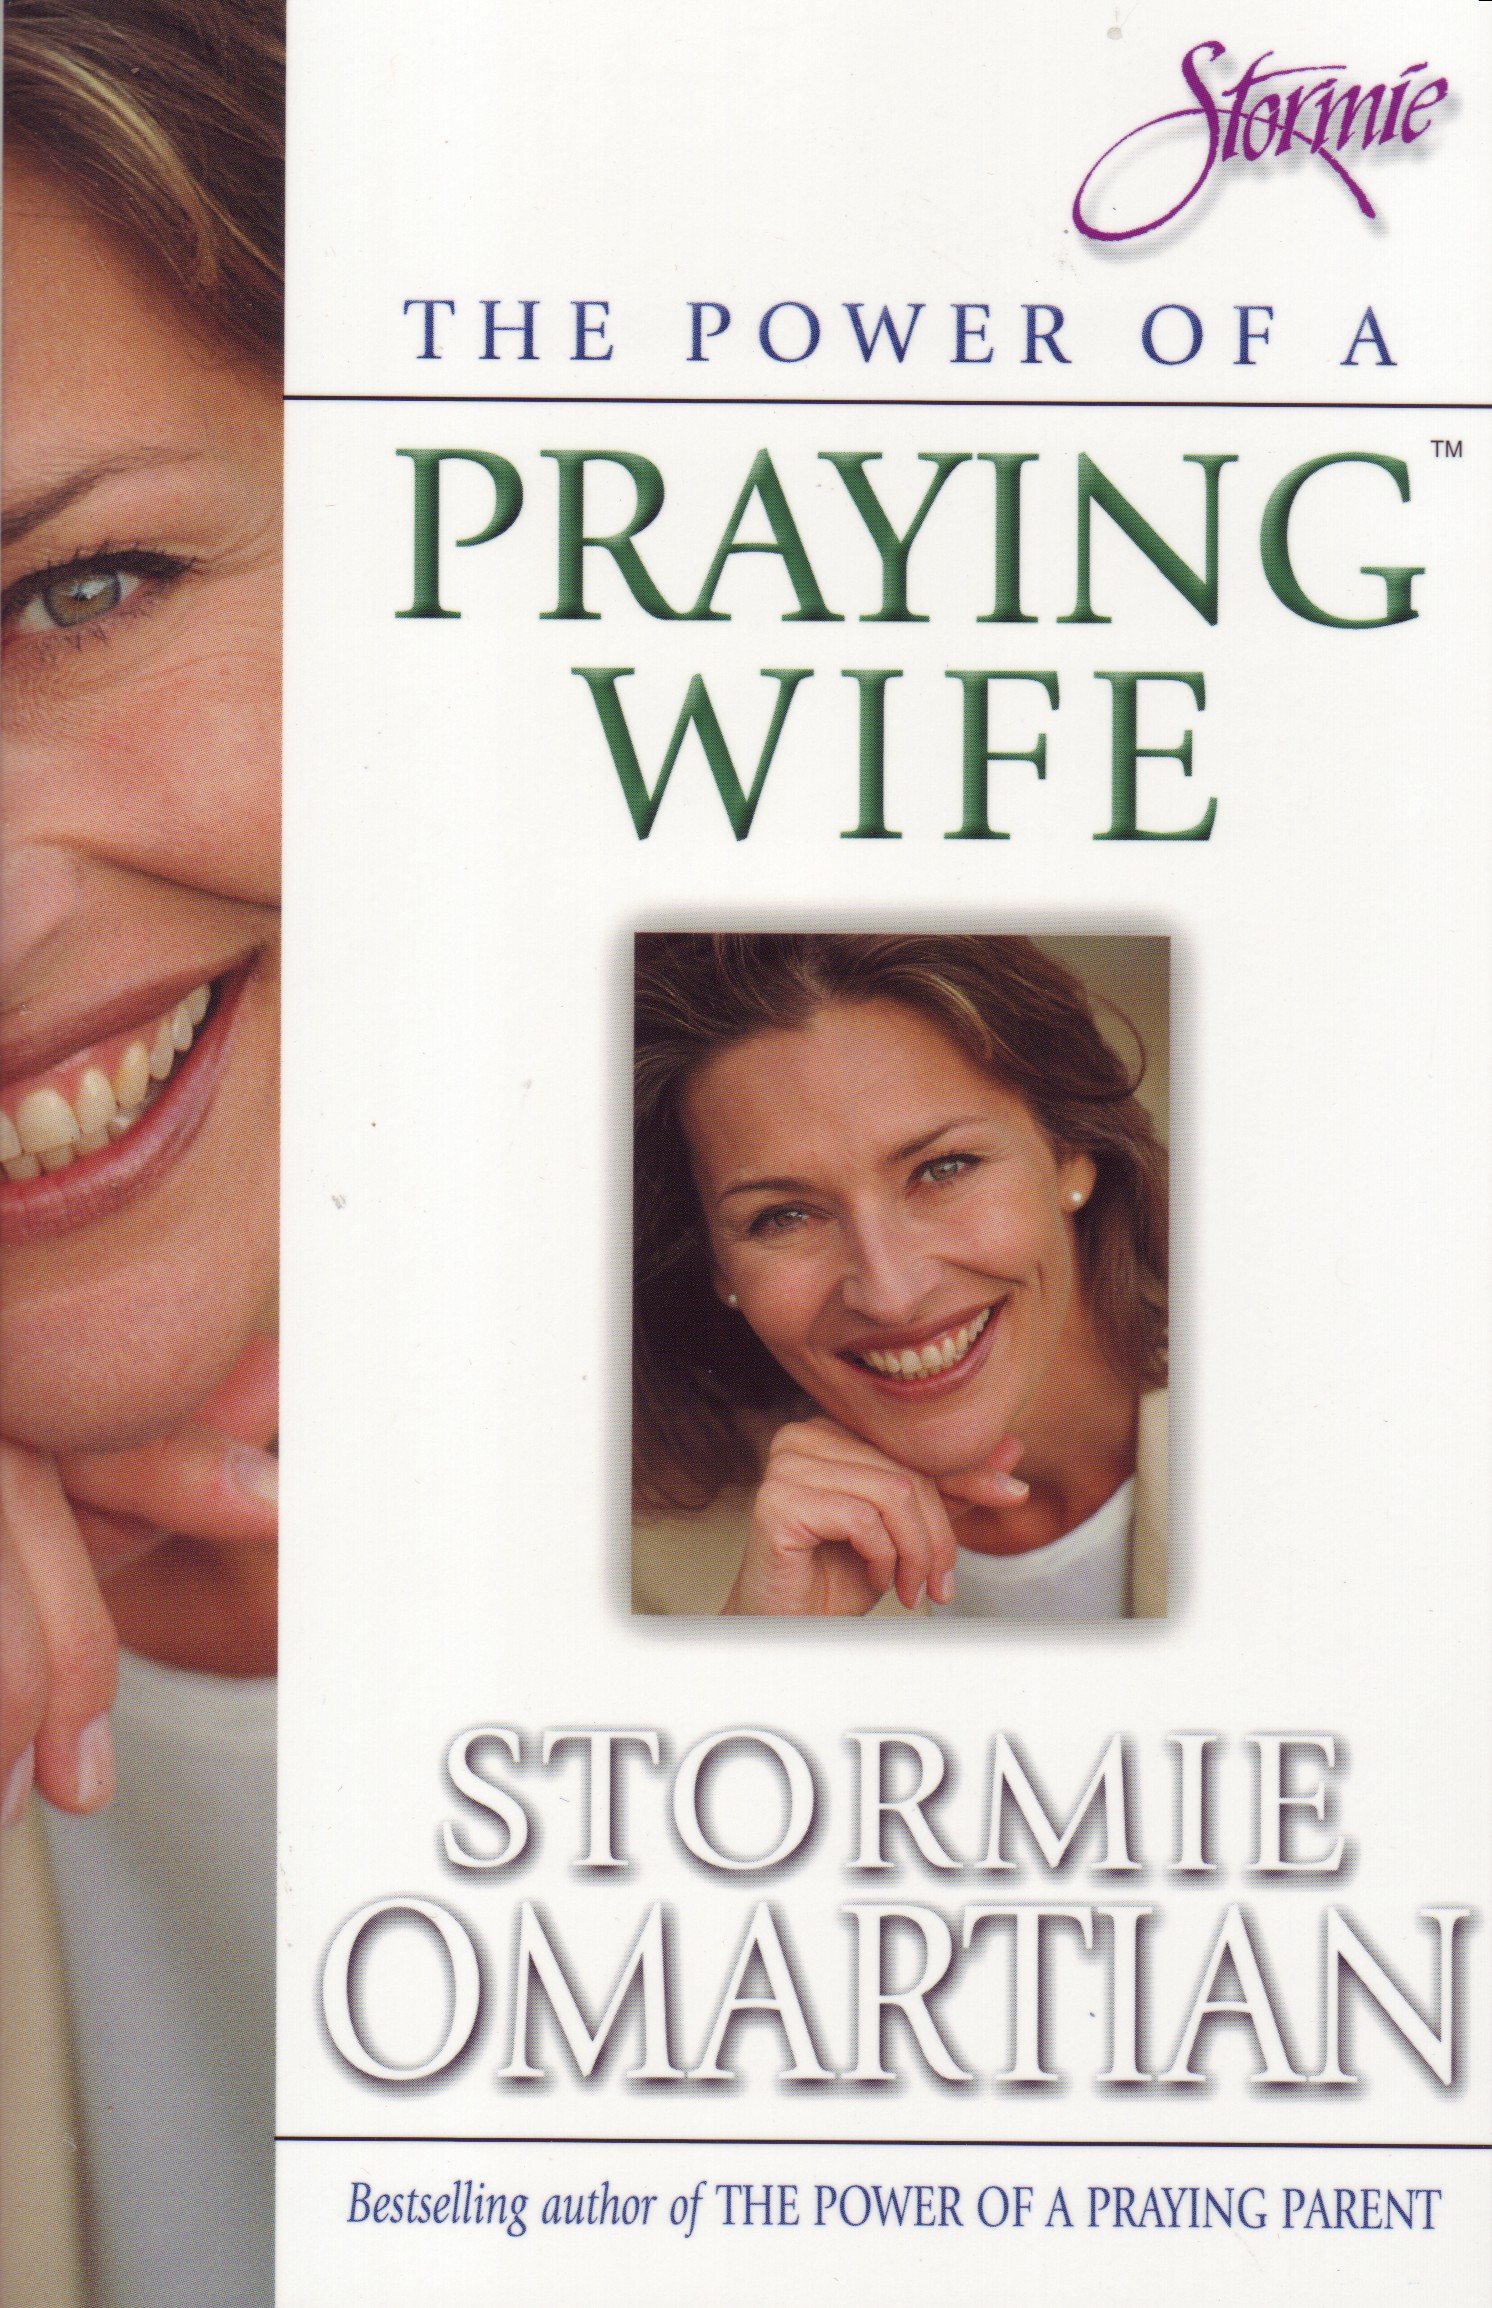 THE POWER OF A PRAYING WIFE